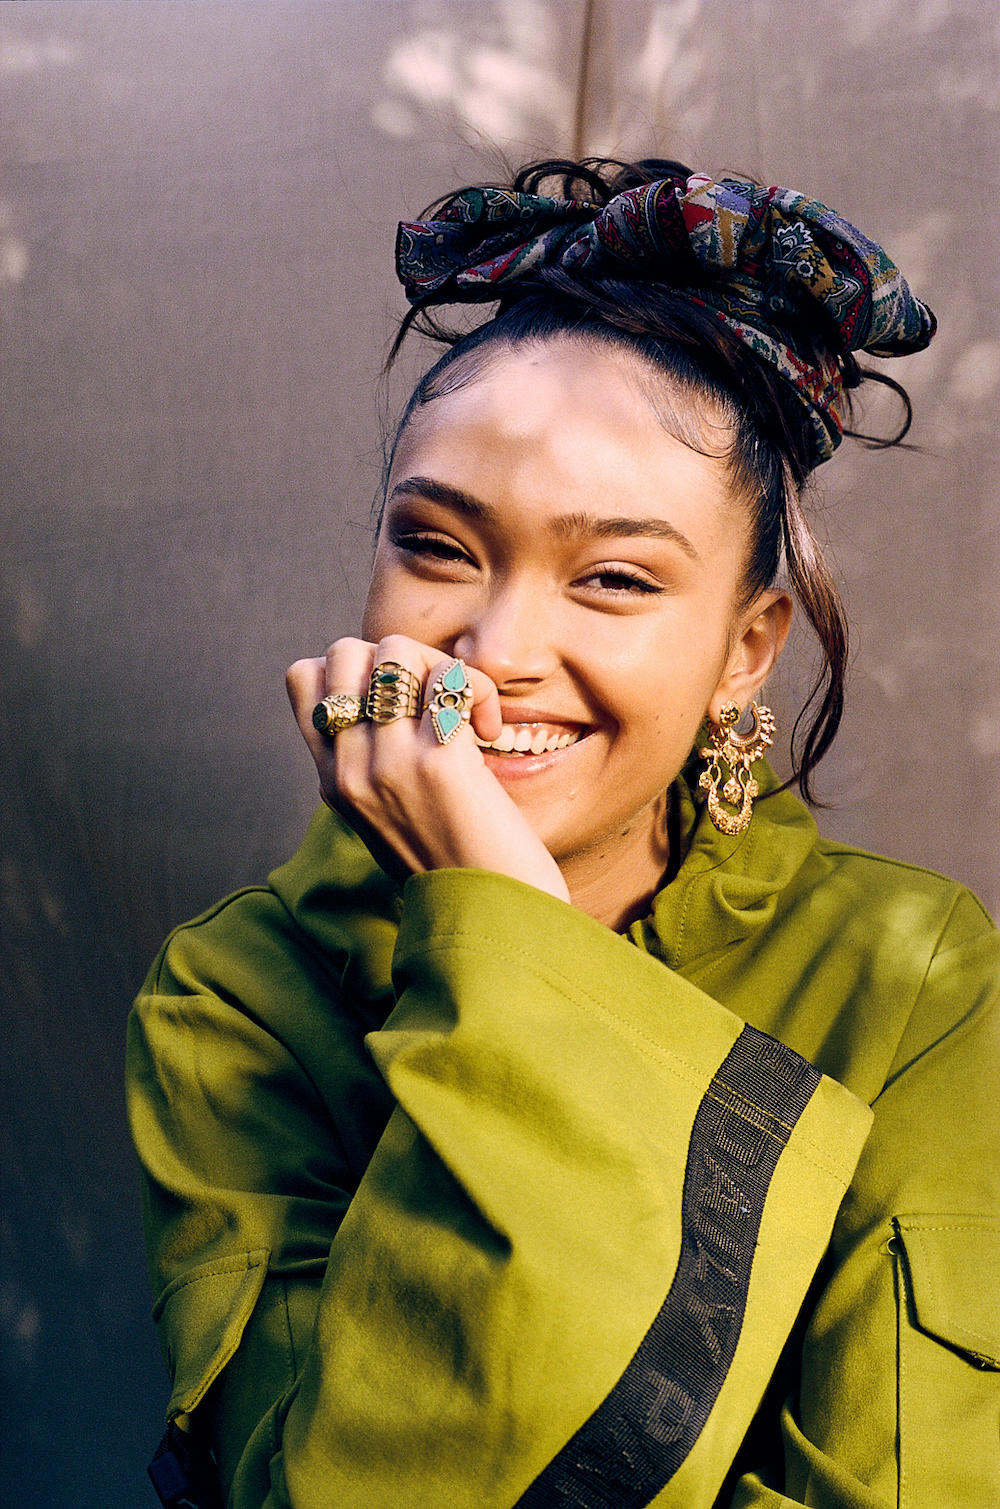 Joy Crookes on Influences, Songwriting, and the Strength in Vulnerability